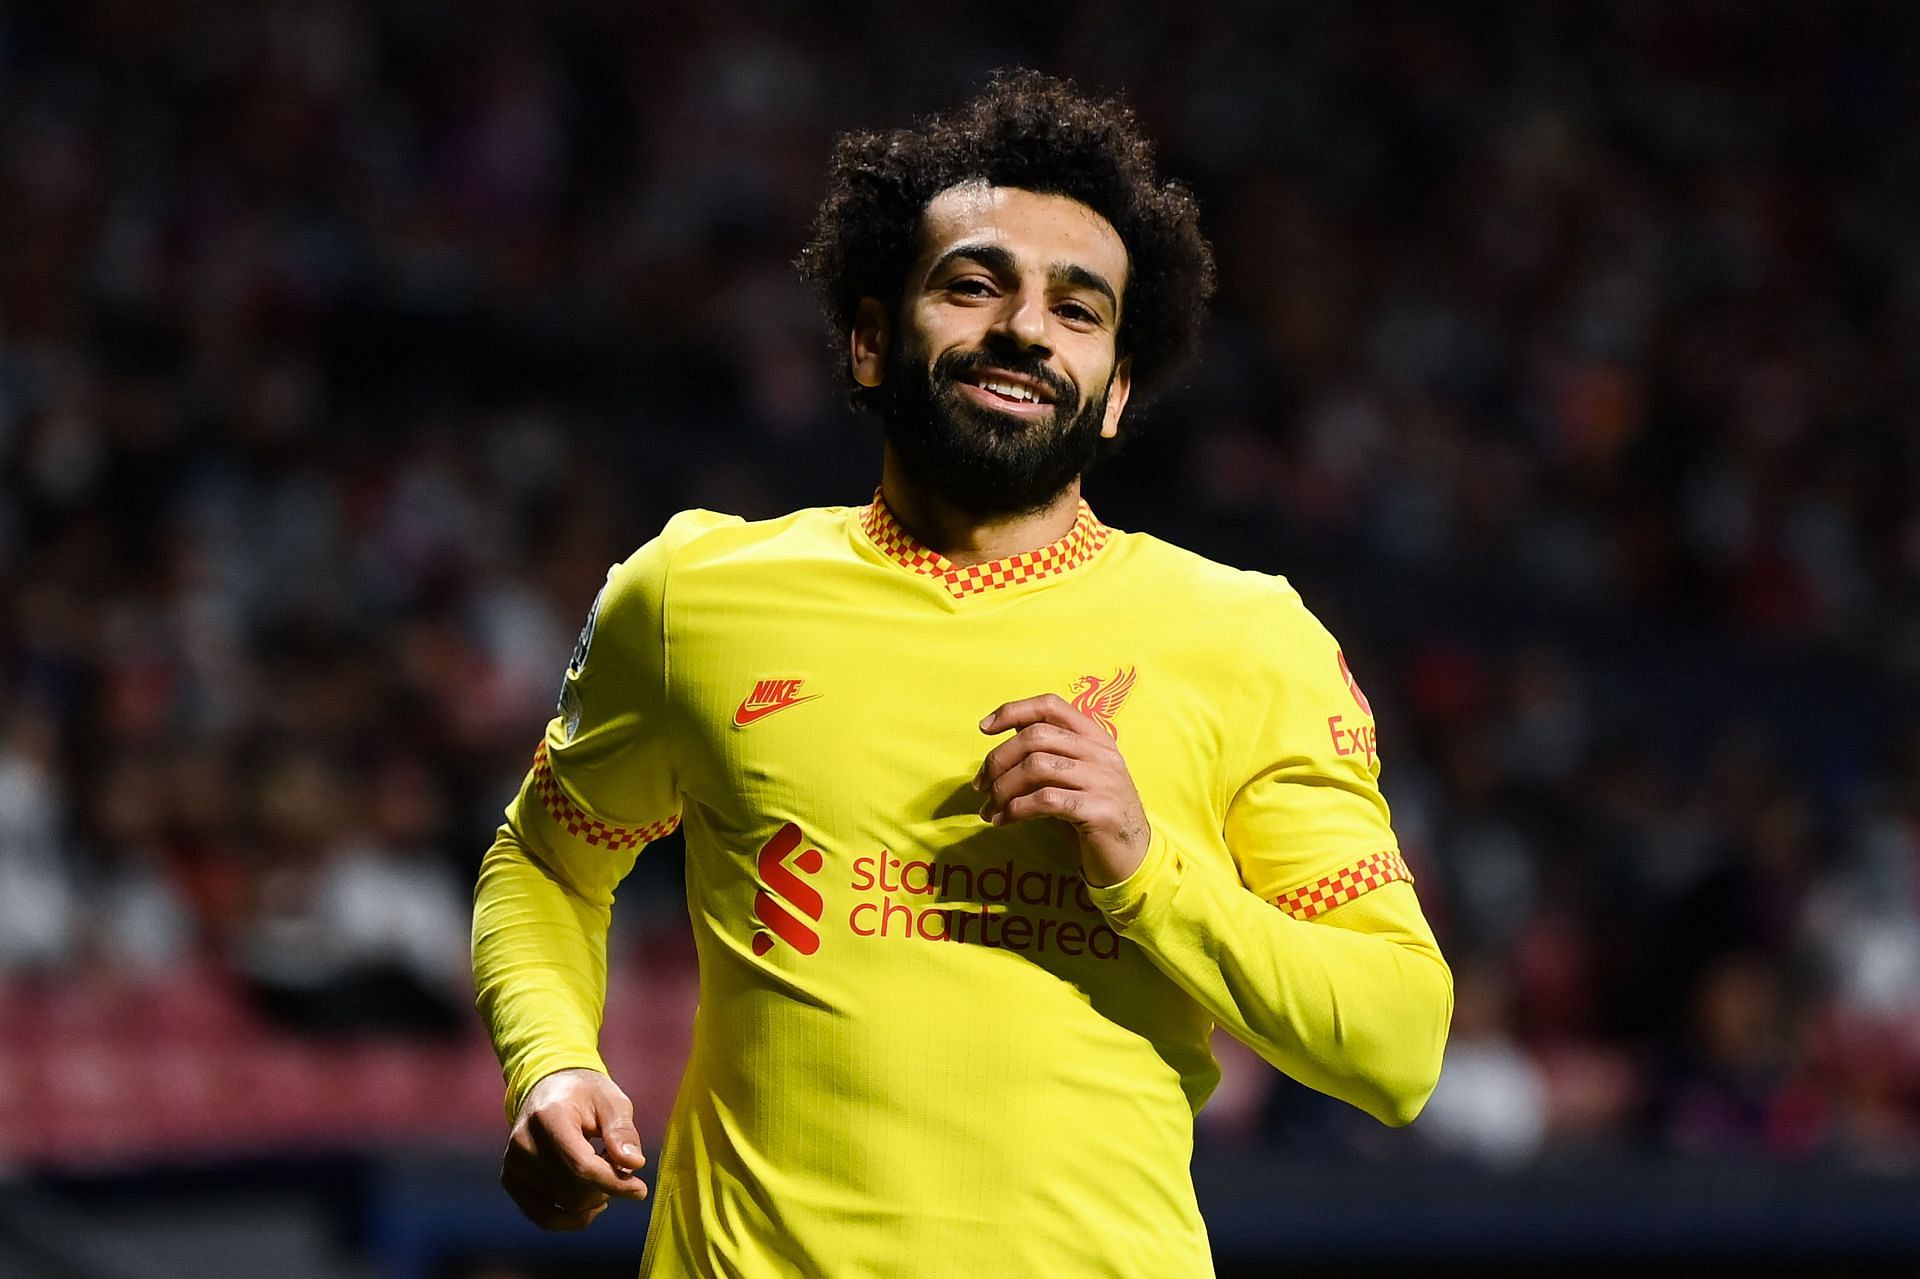 Salah is one of the best players in the world at the moment